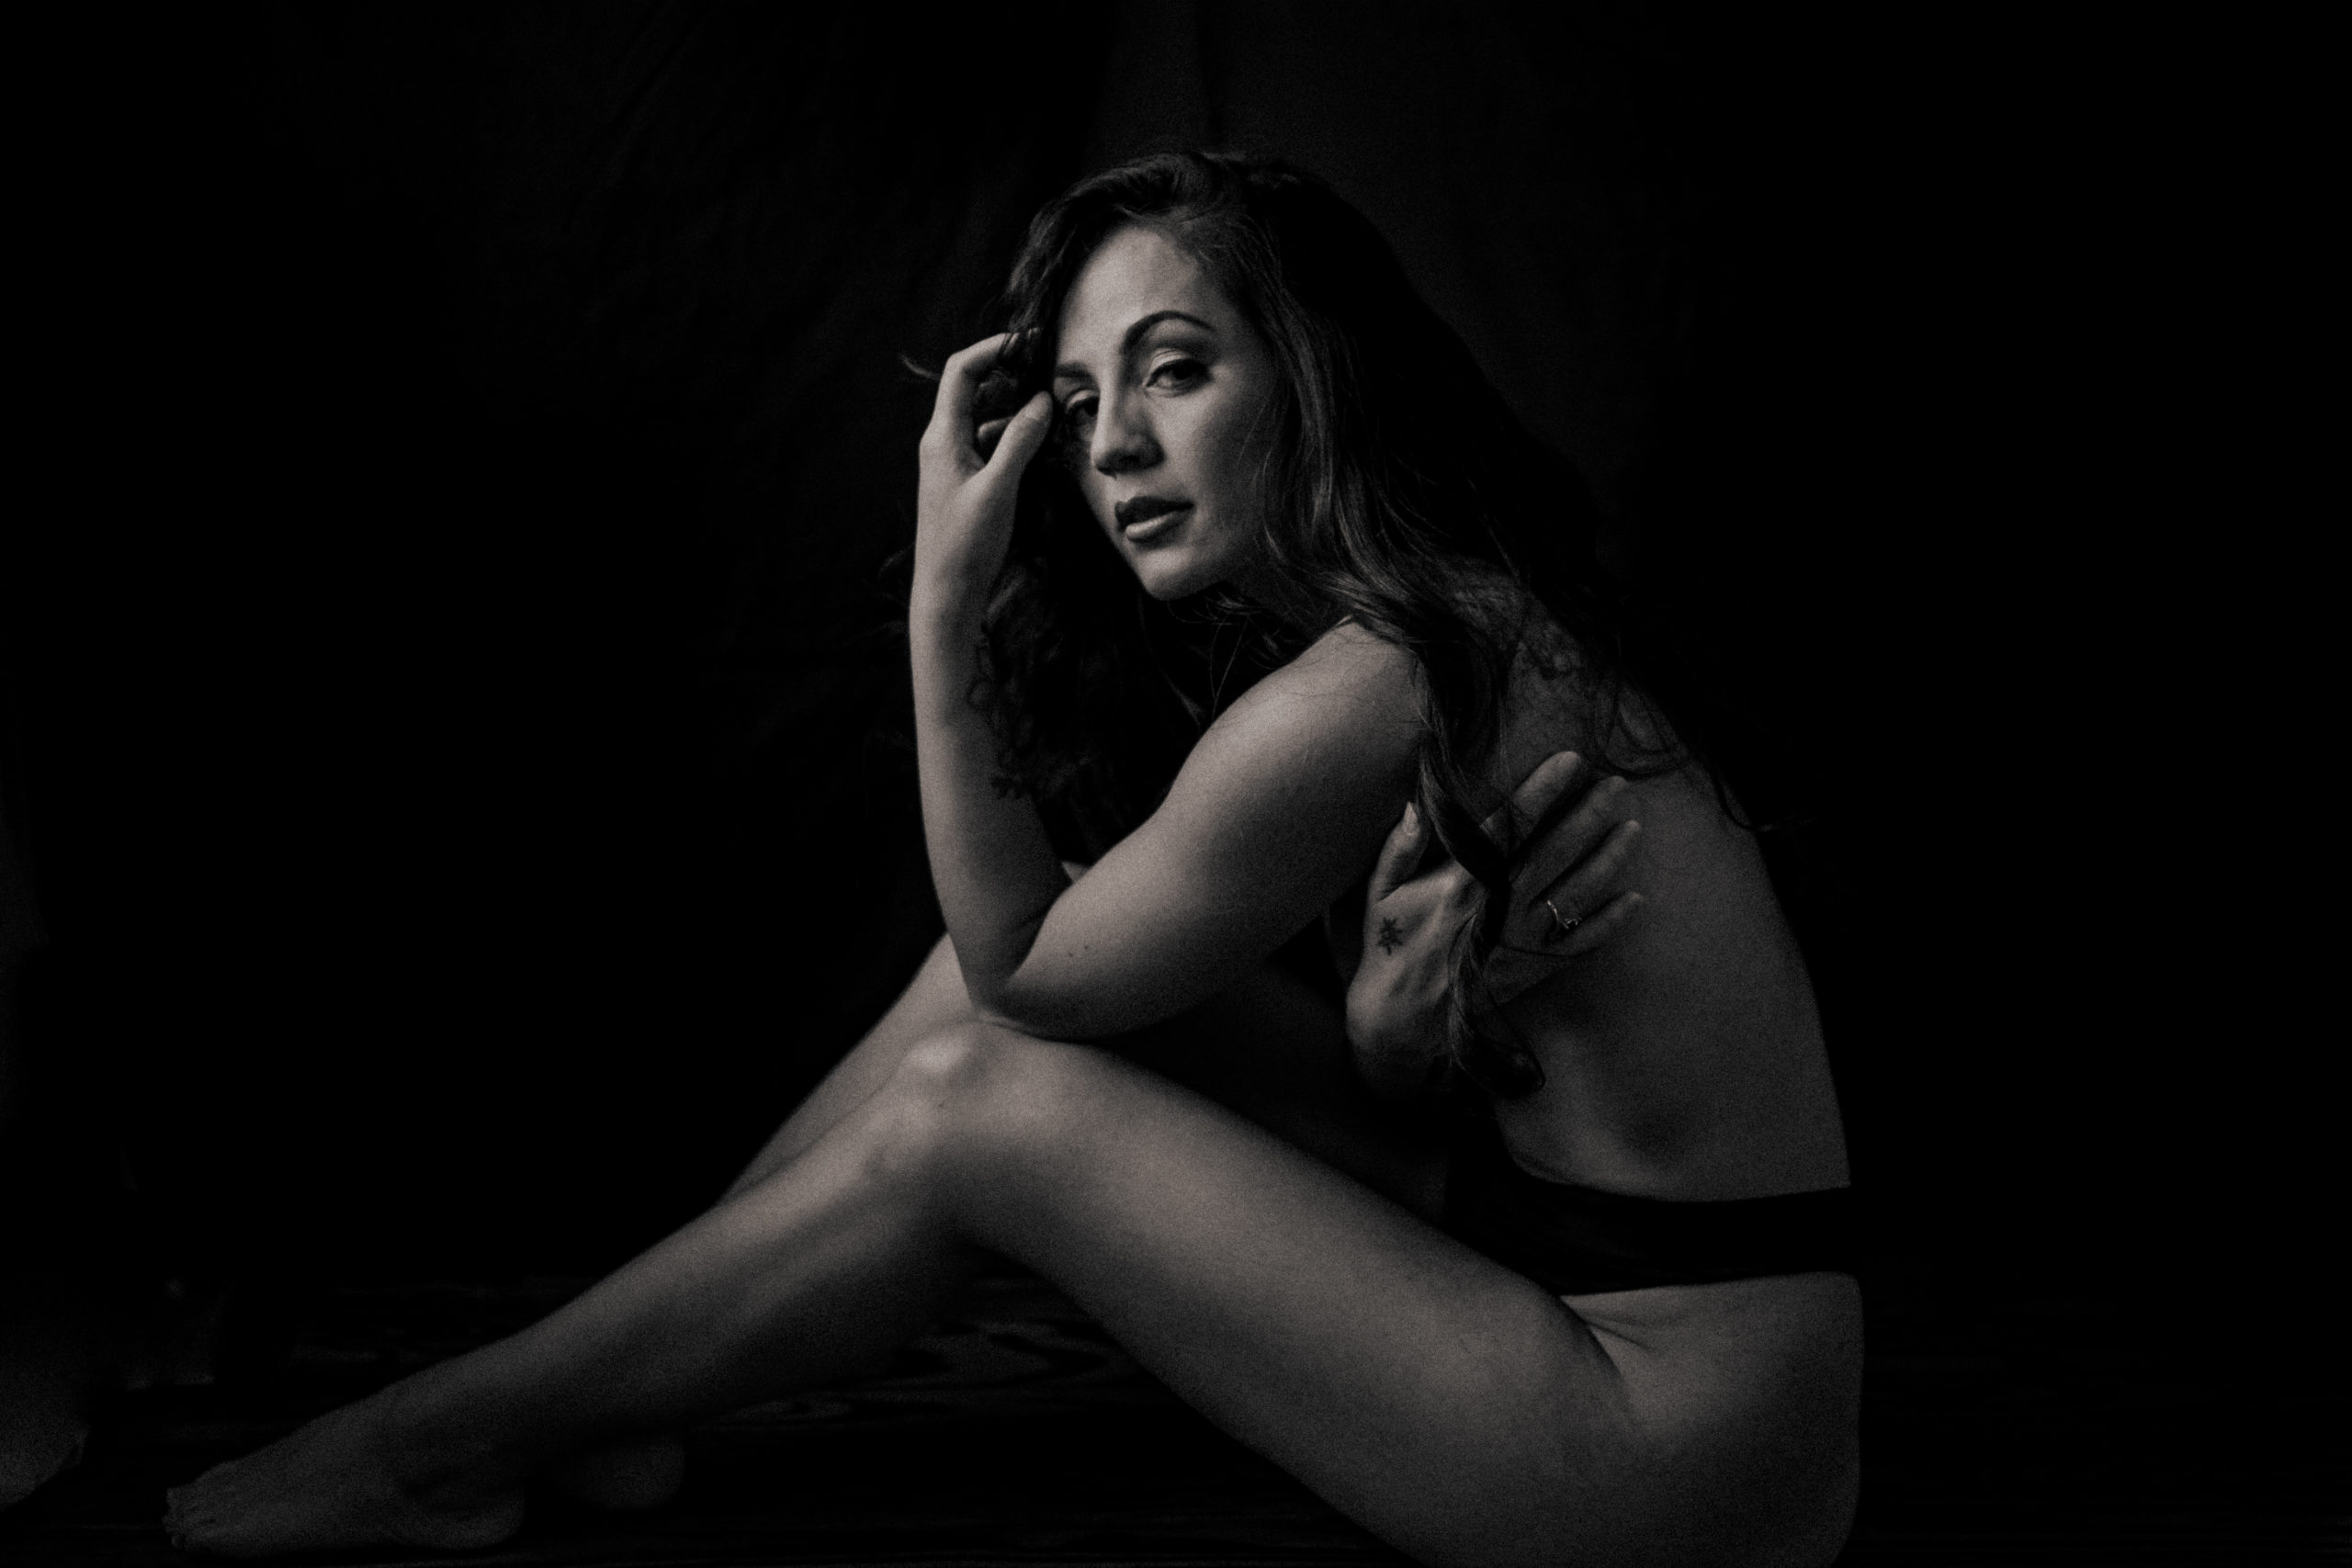 Black and White of a woman sitting topless in deep thought for a boudoir session with St Pete boudoir photographer Tami Keehn.